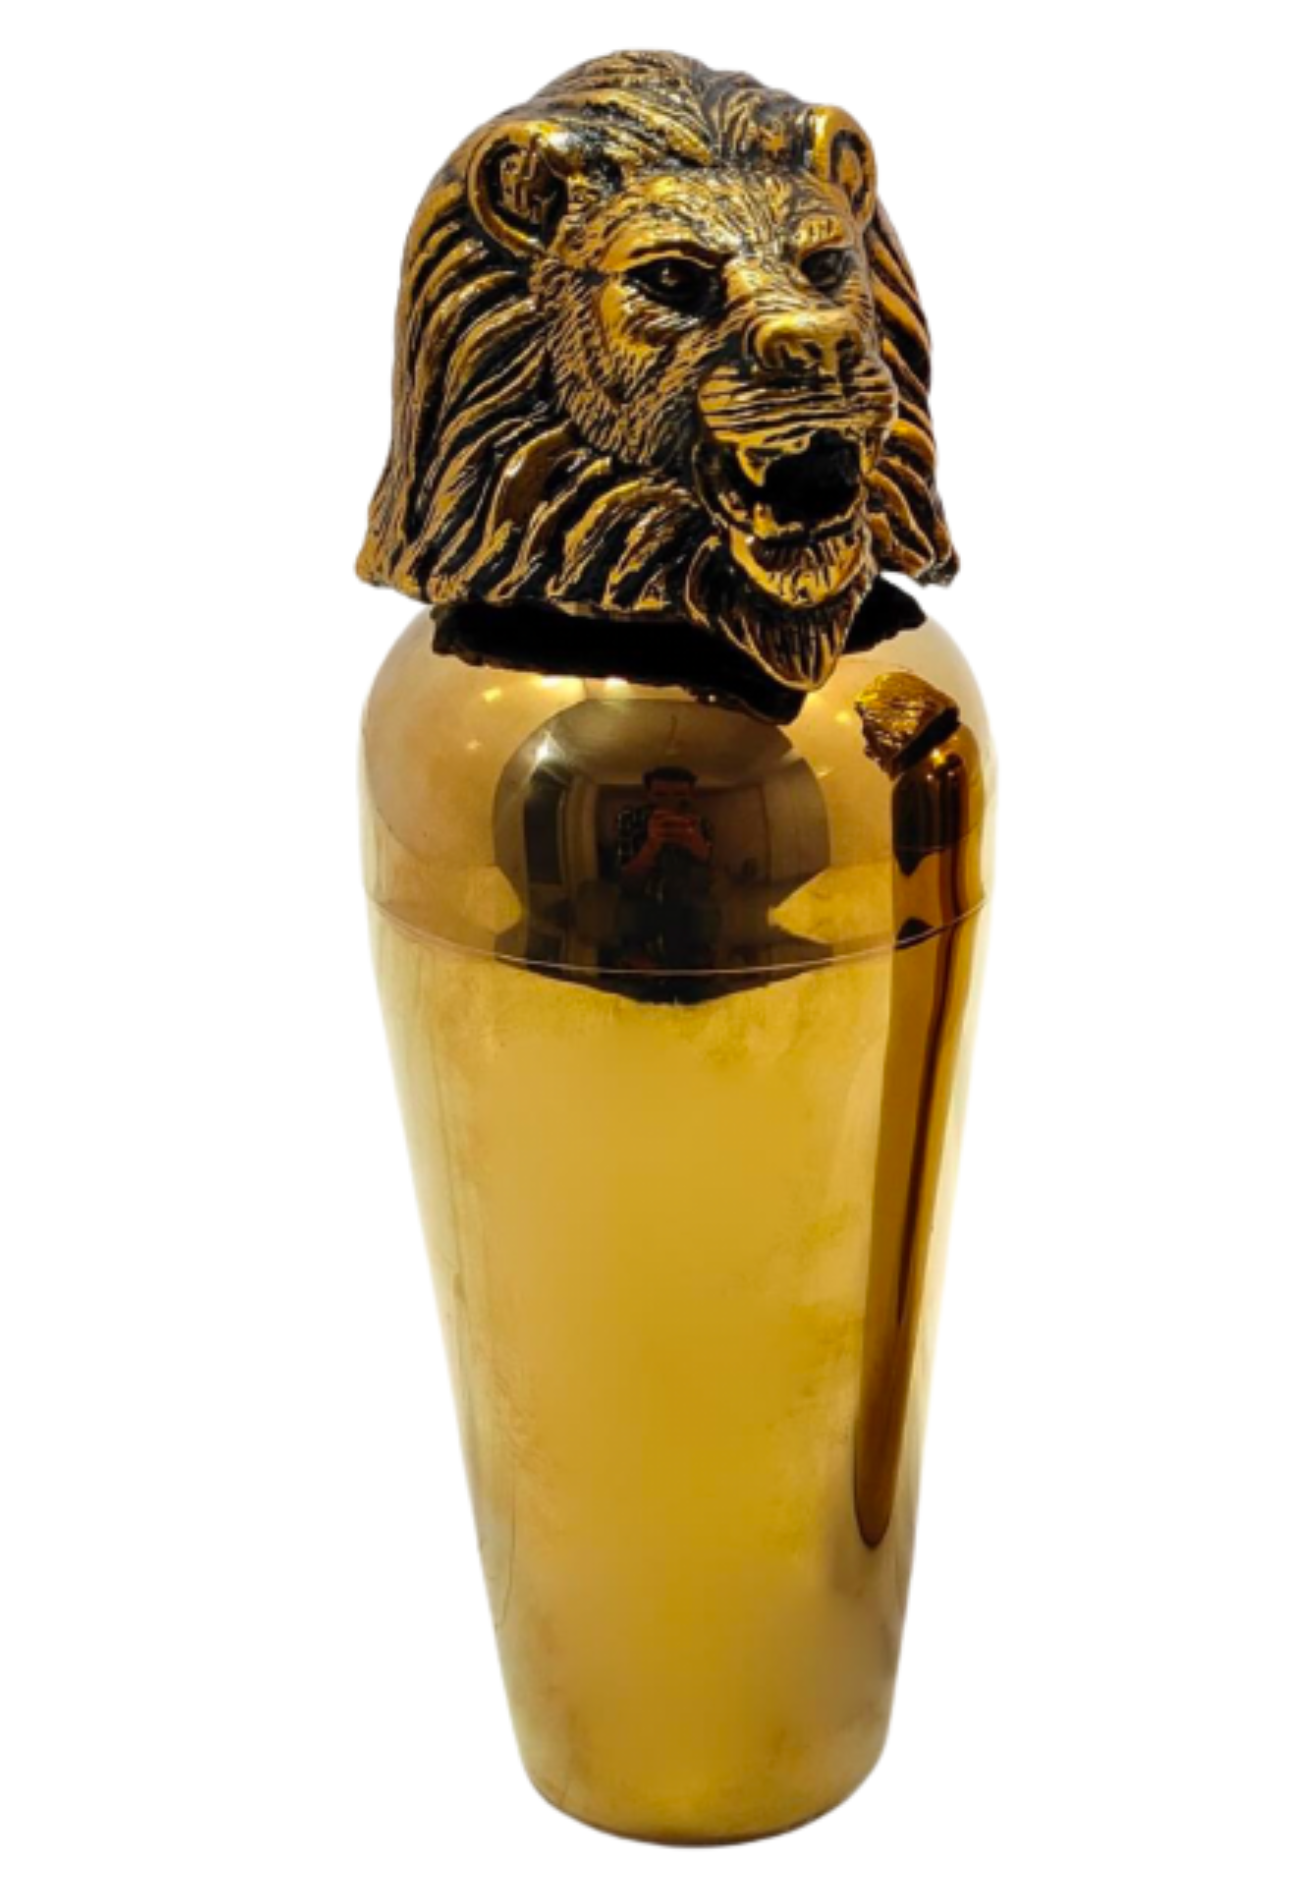 ANDROCLES LION COCKTAIL SHAKER - HANDFORGED LION LID